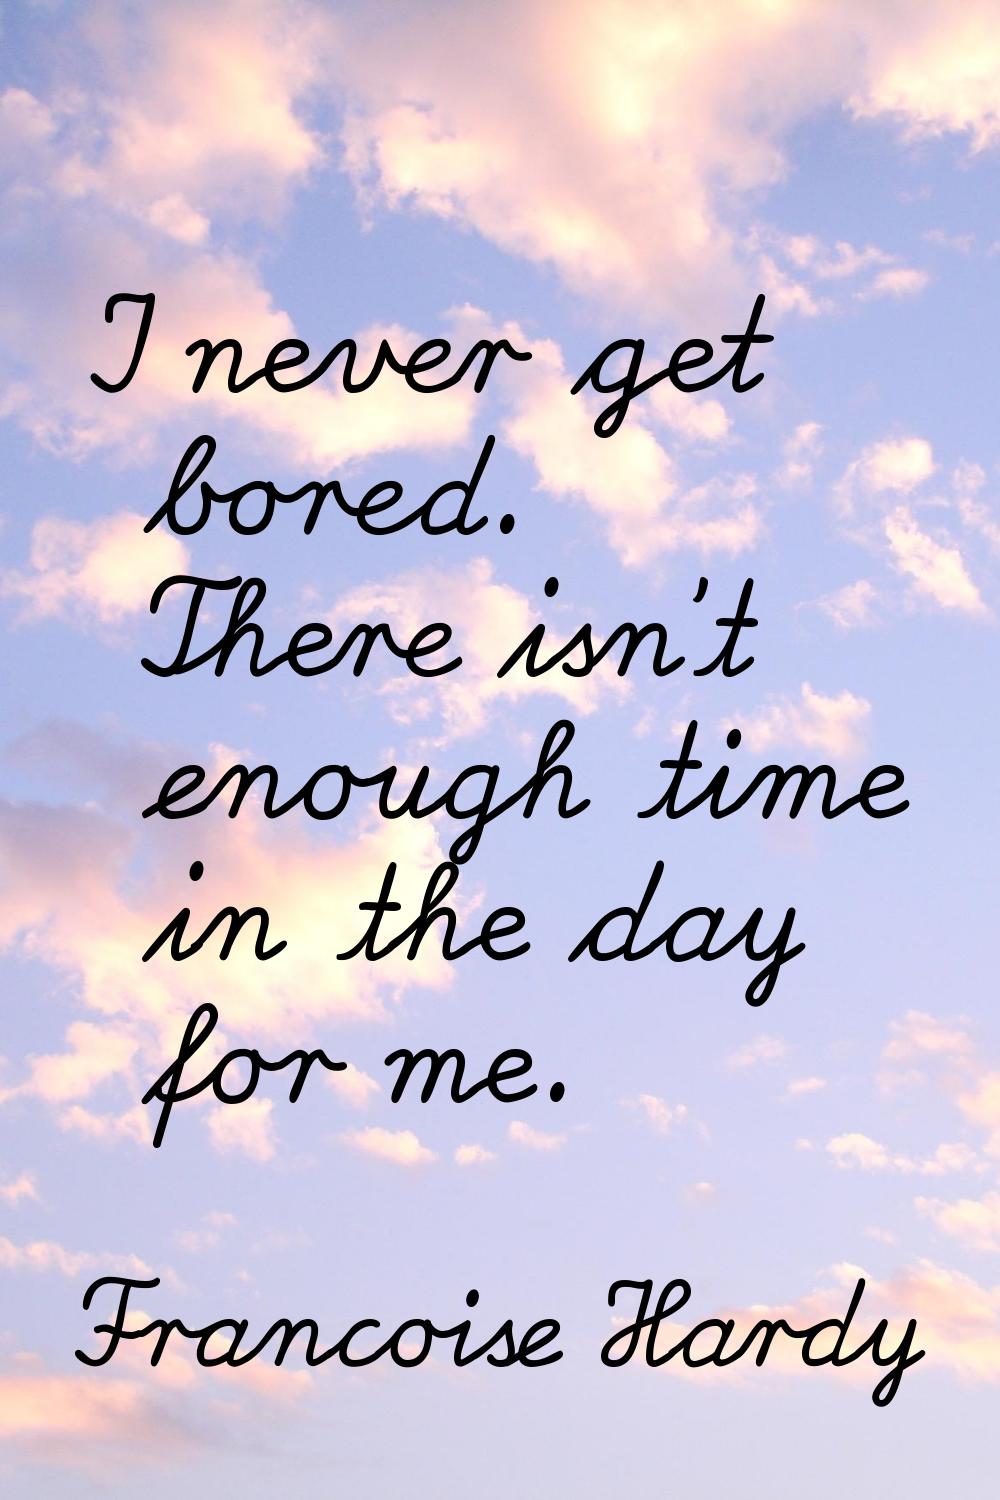 I never get bored. There isn't enough time in the day for me.